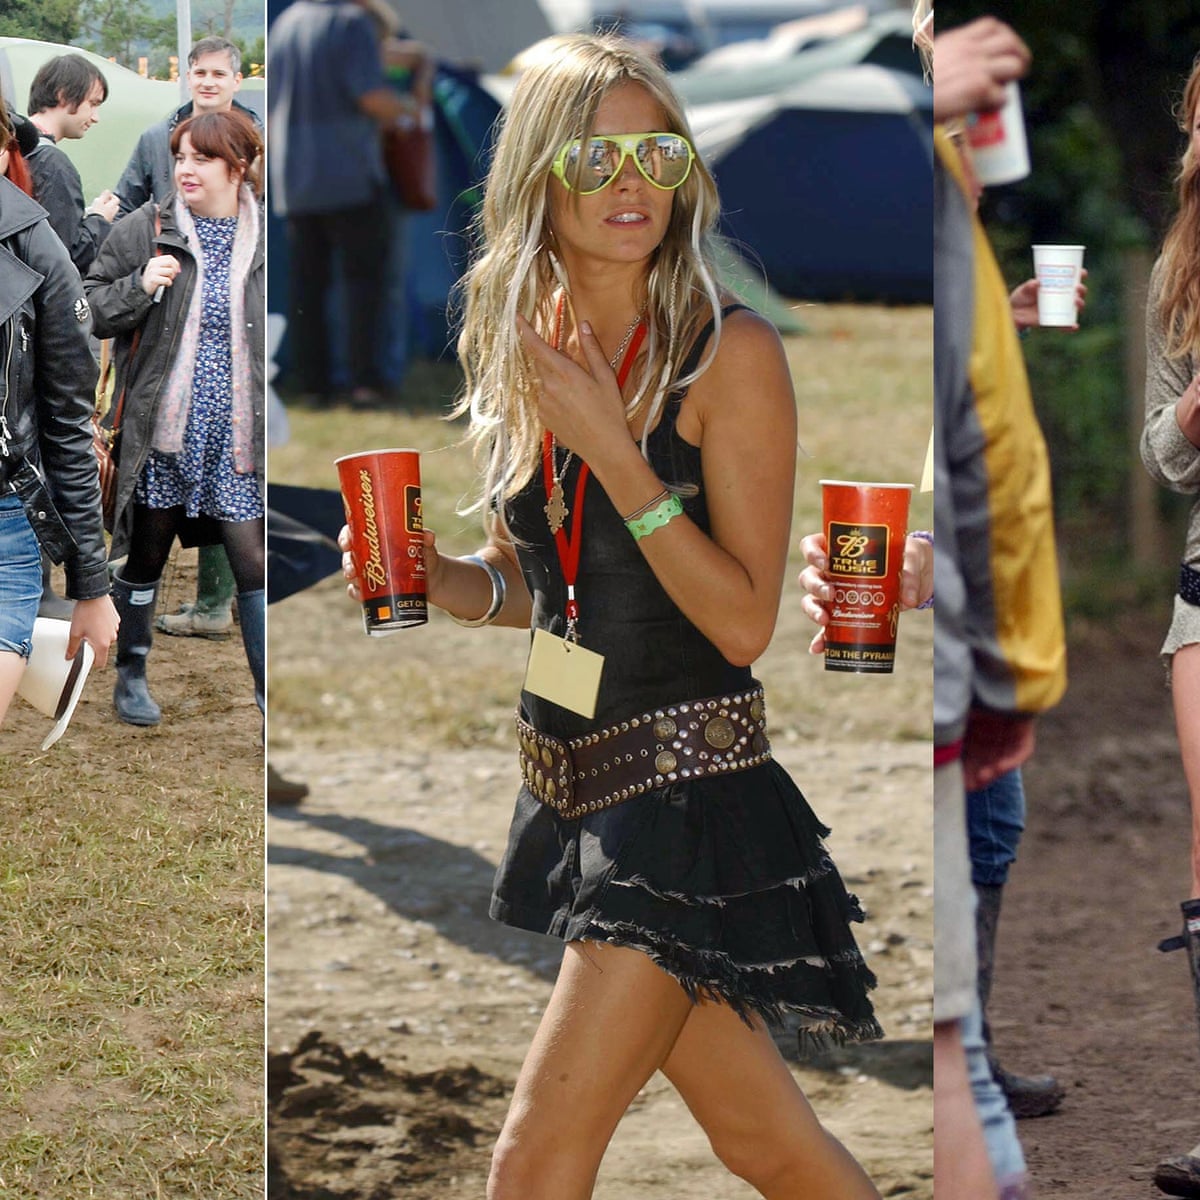 Festival fashion is stuck in the era of Kate Moss v Sienna Miller one | Festival fashion | The